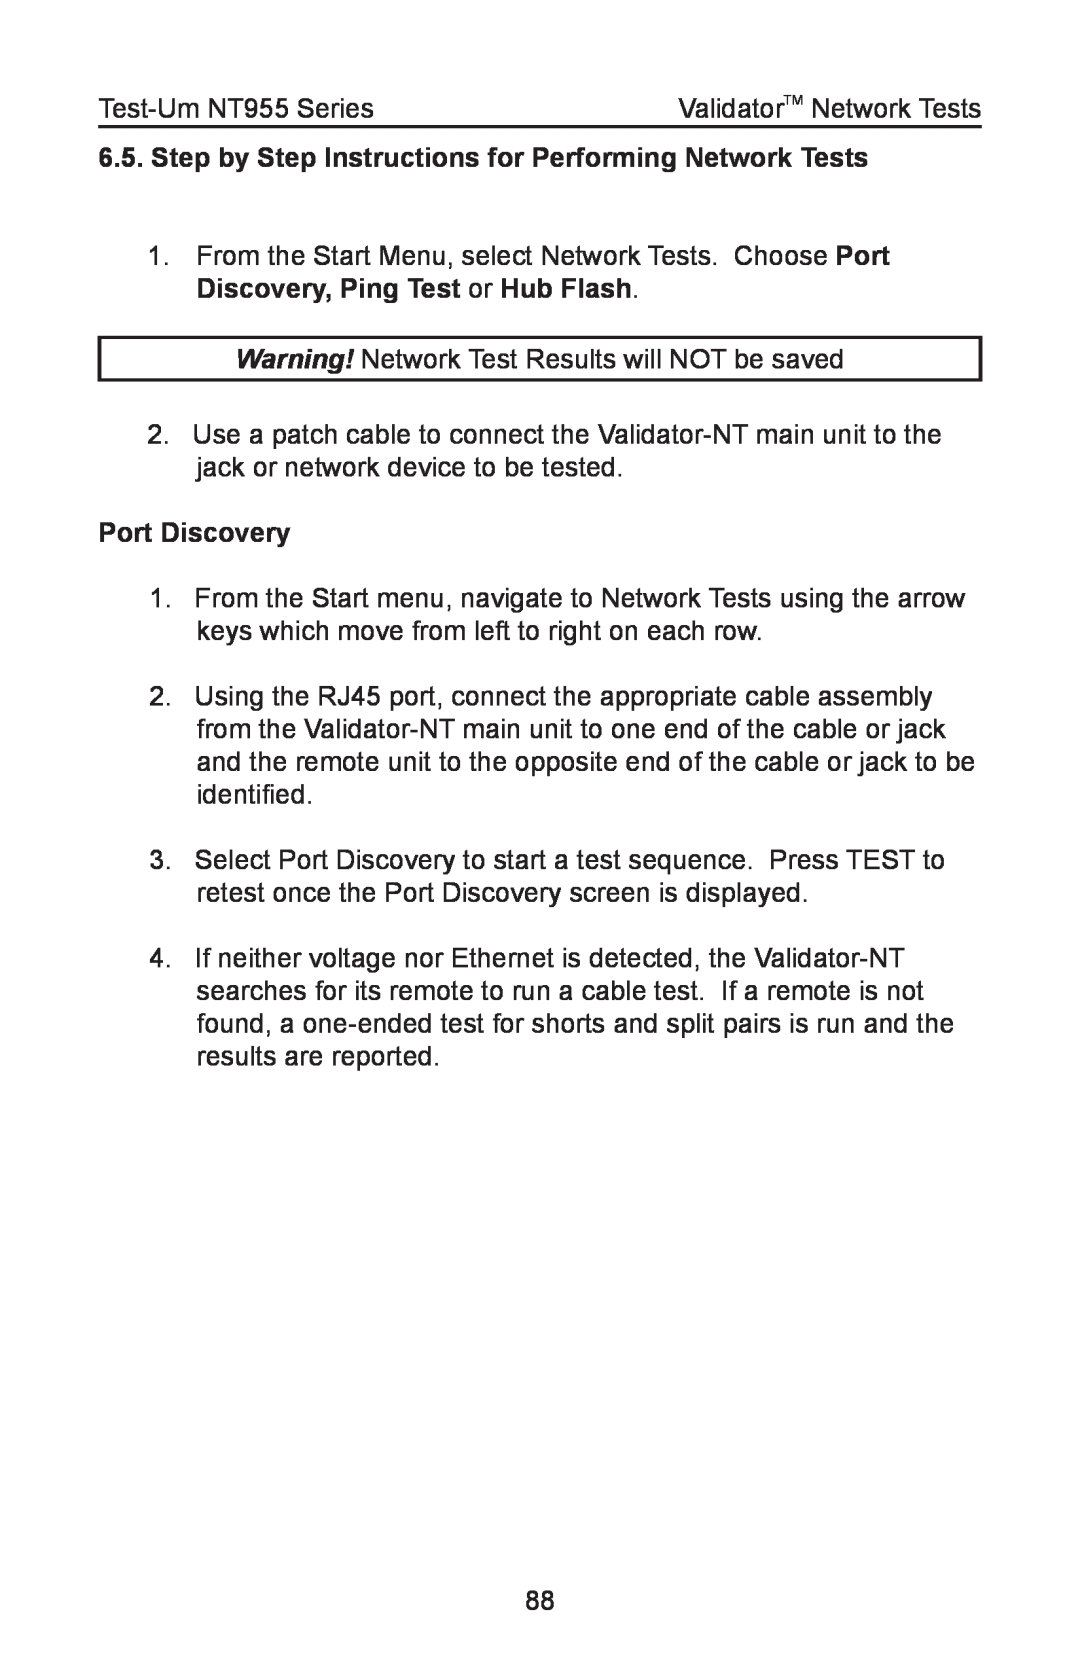 Test-Um NT955 operating instructions Step by Step Instructions for Performing Network Tests, Port Discovery 